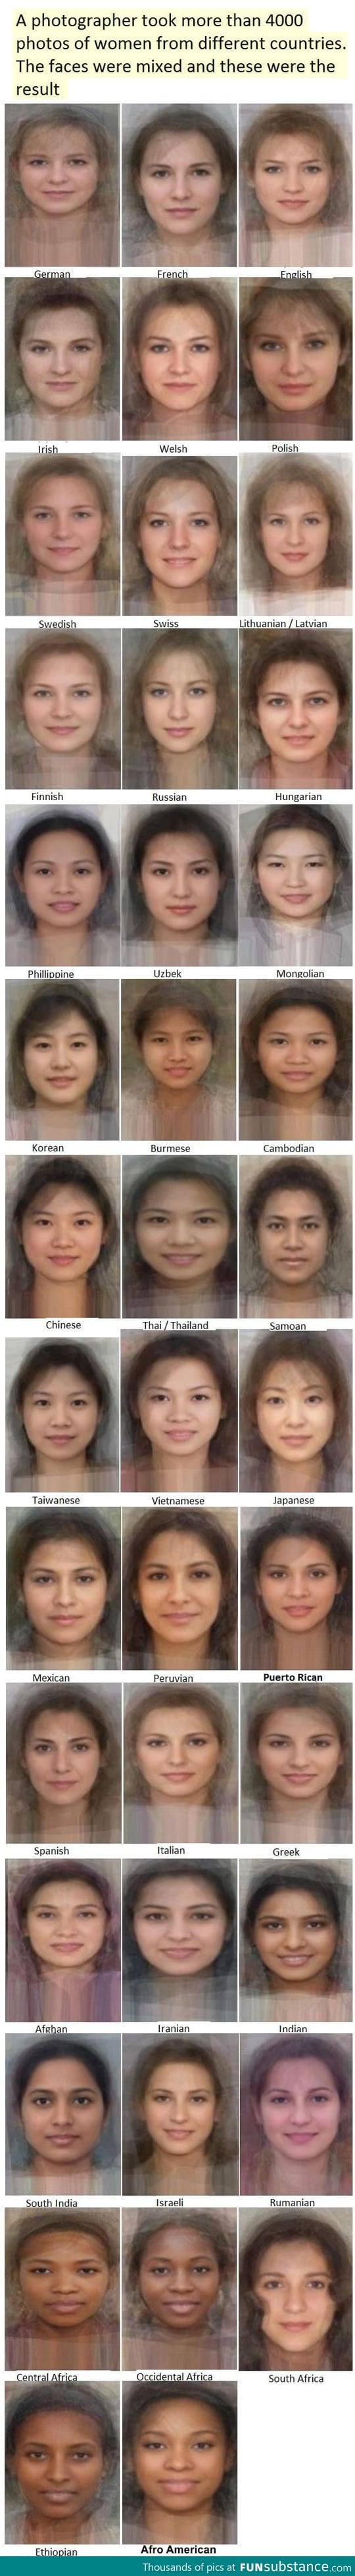 The average woman from each country